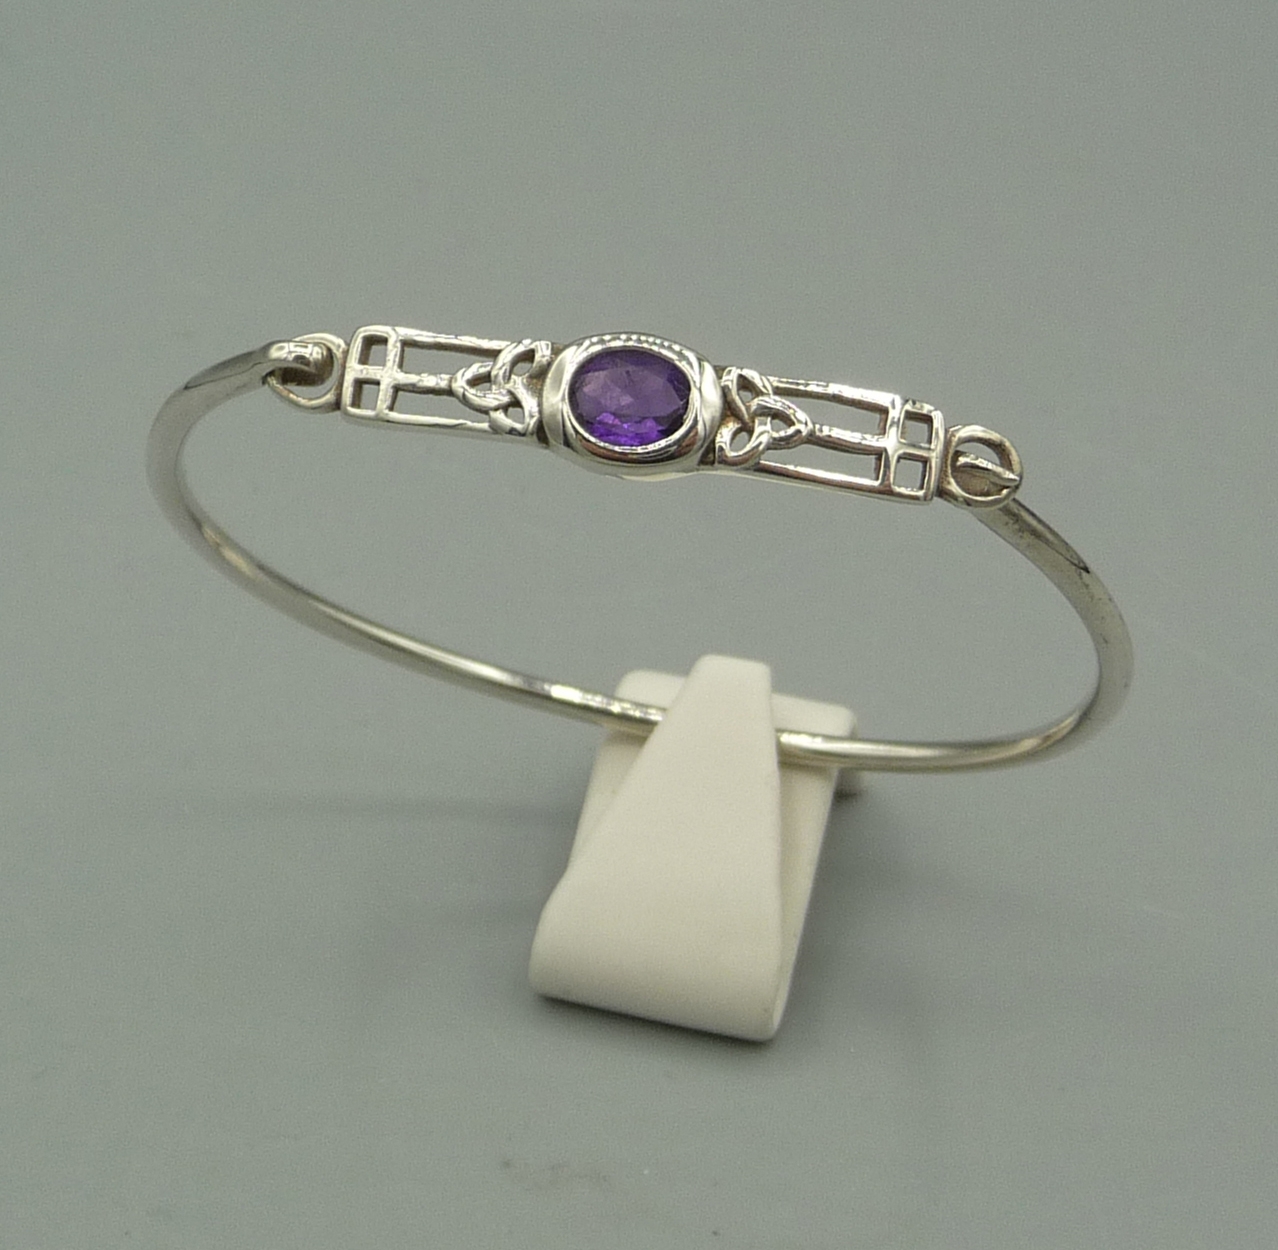 Silver 925 Sterling Mackintosh bangle with Amethyst